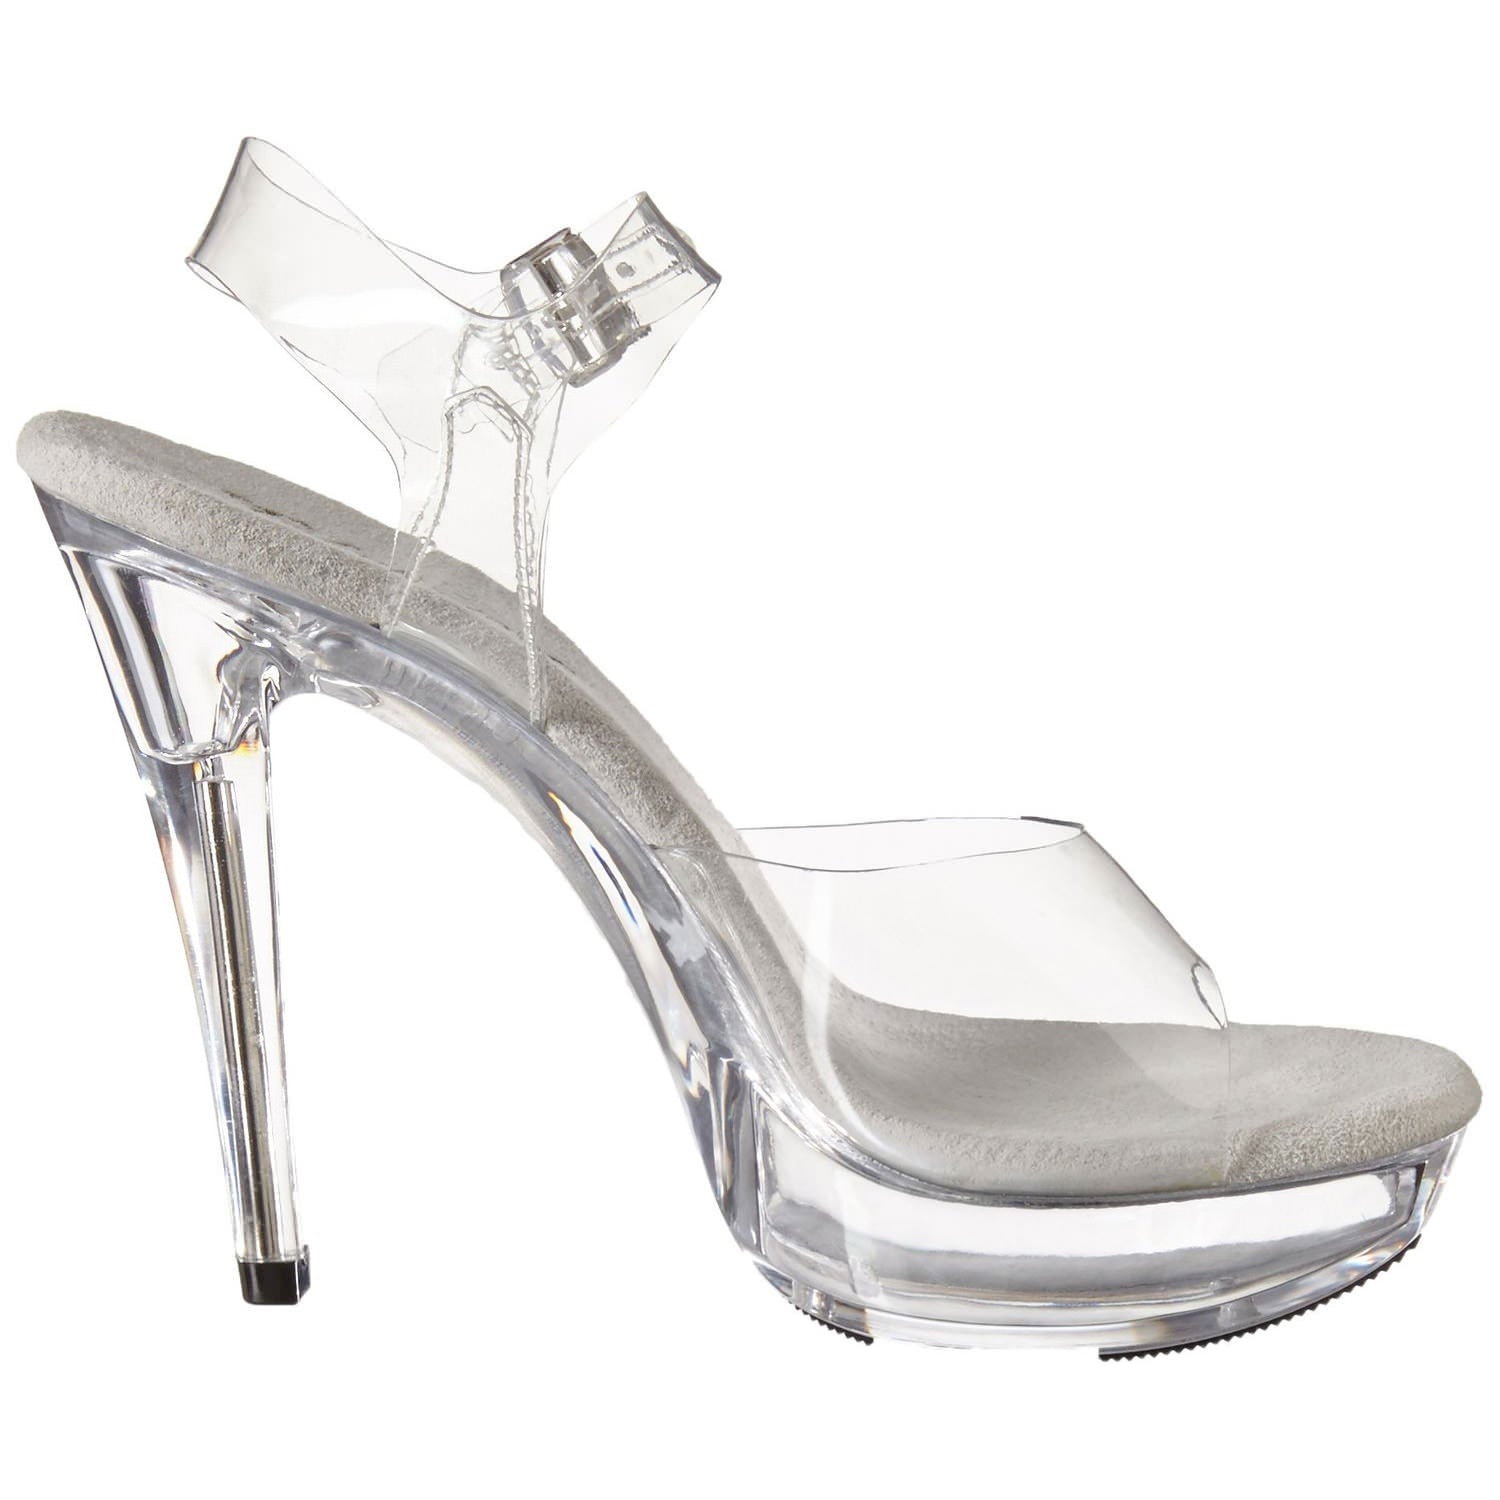 FABULICIOUS COCKTAIL-508 Clear-Clear Ankle Strap Sandals - Shoecup.com - 6